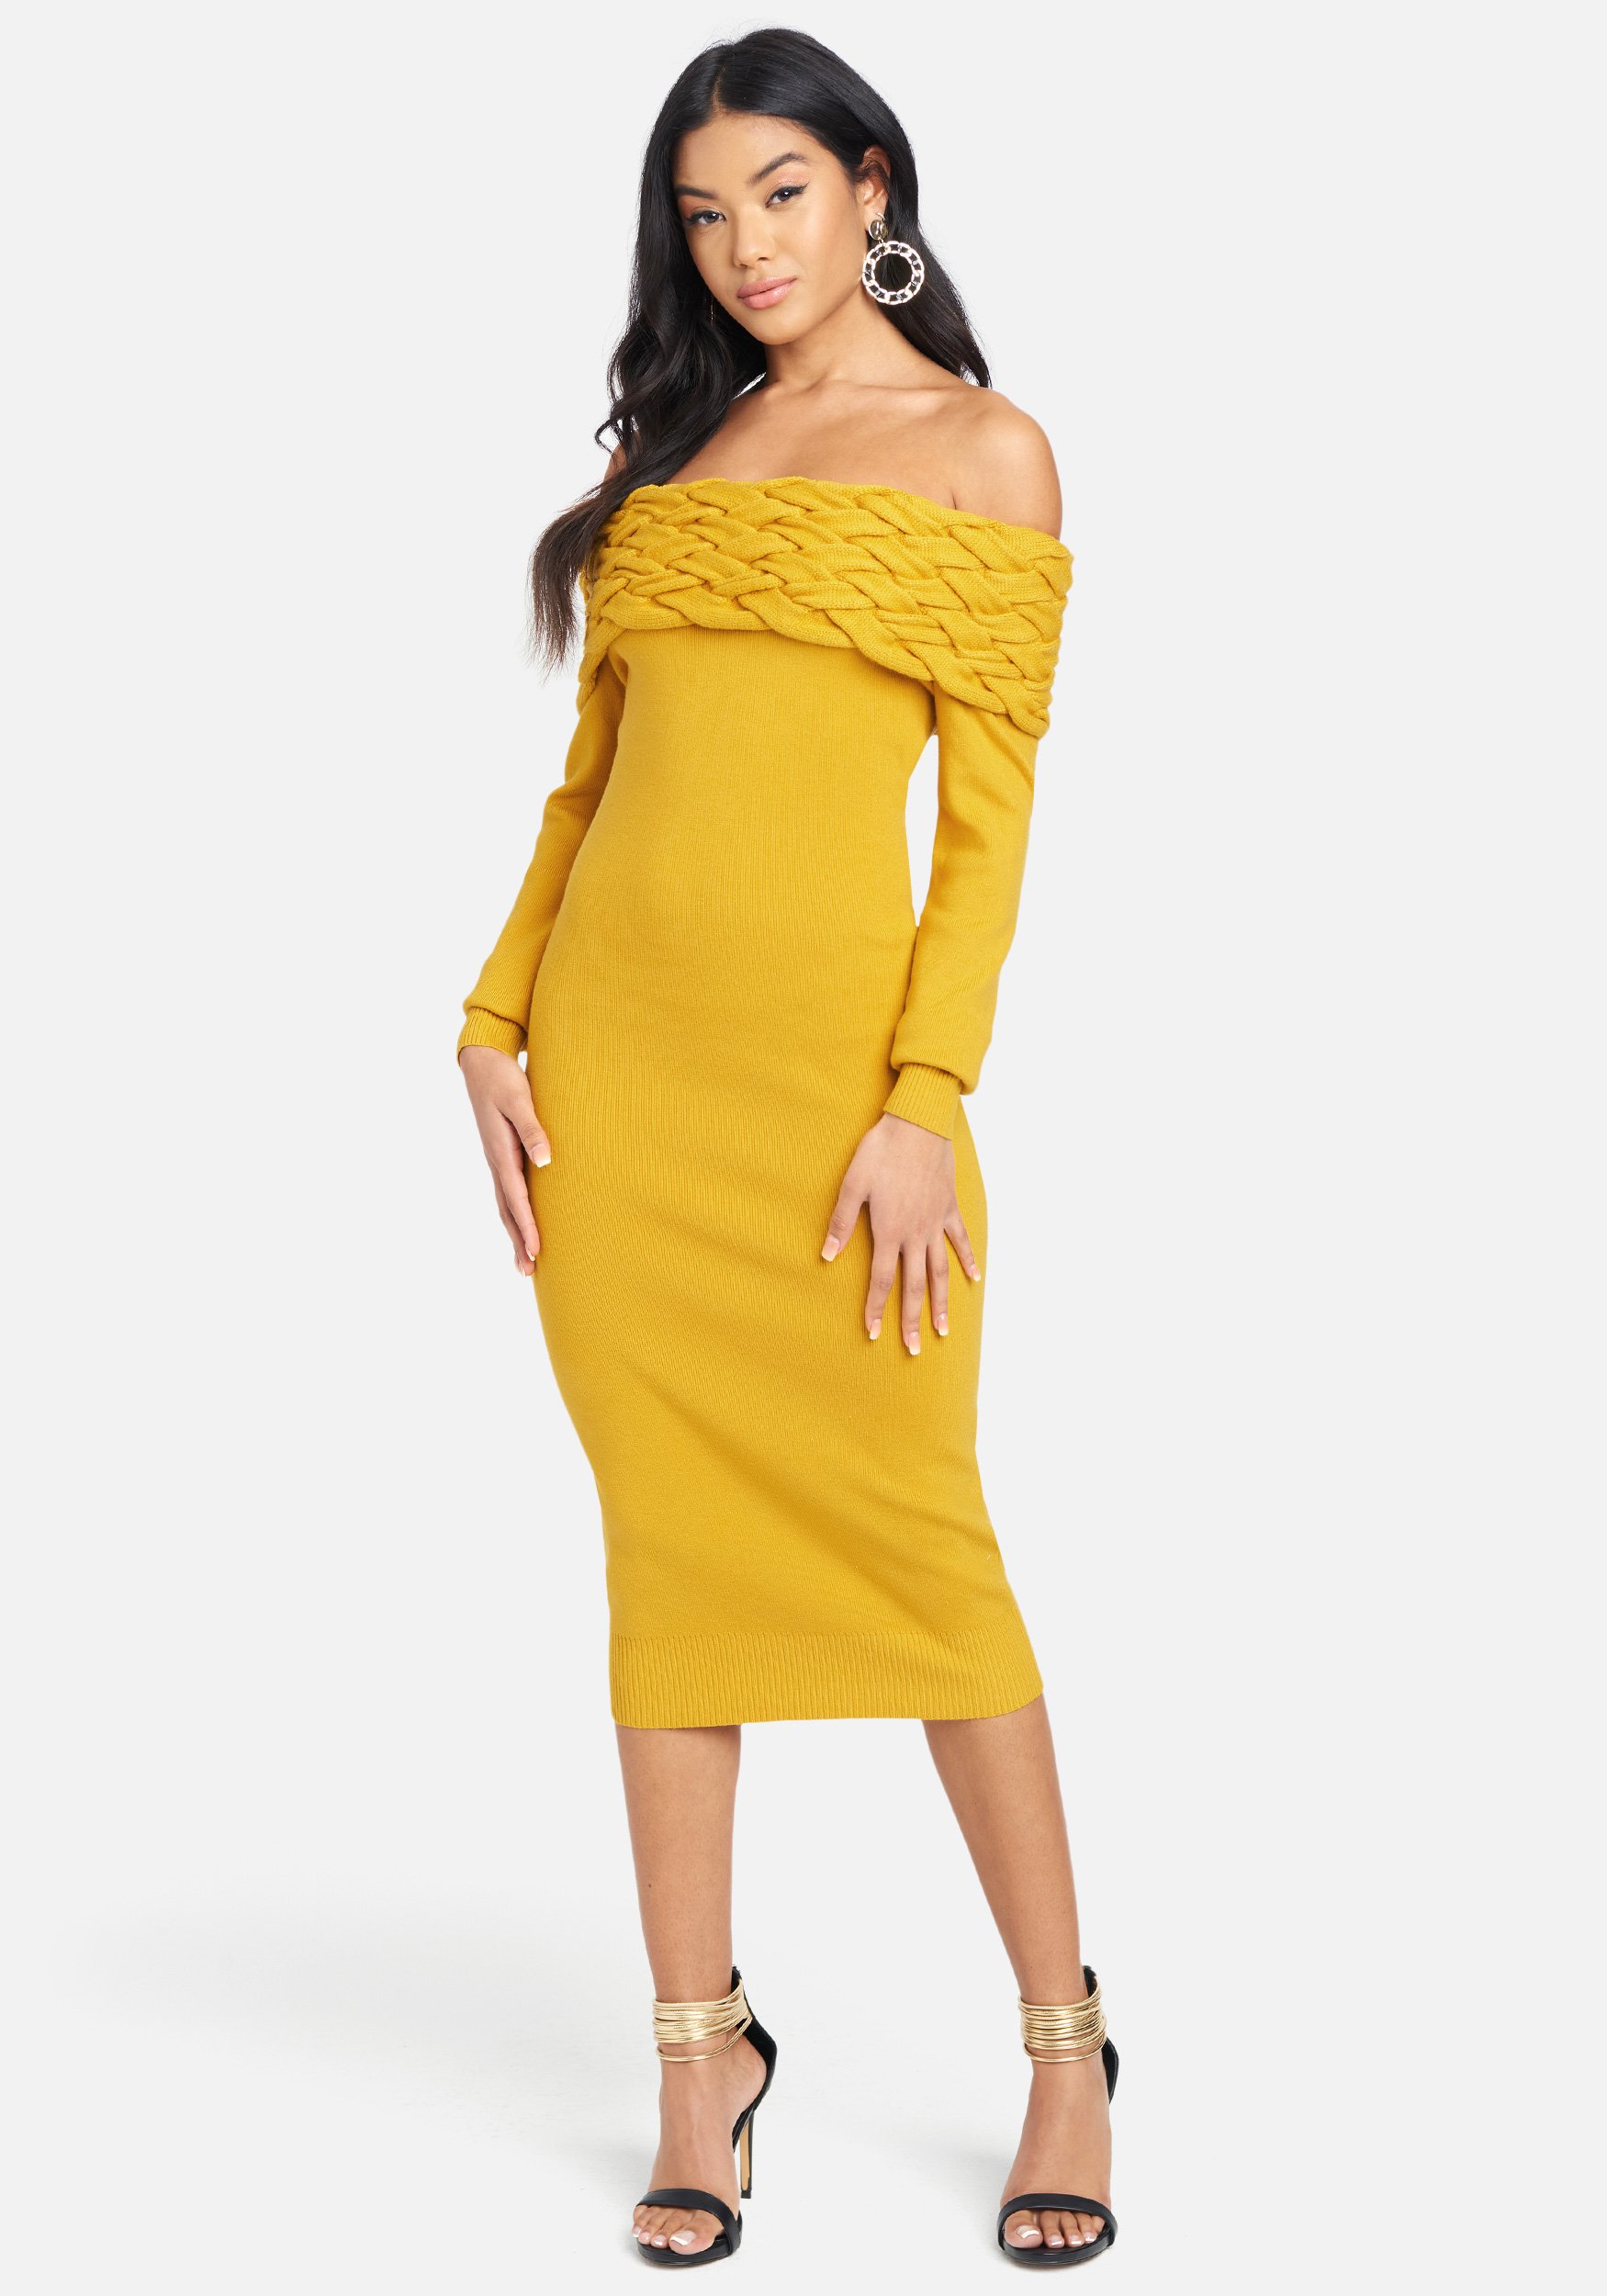 Bebe Women's Off Shoulder Cable Knit Dress, Size Small in Sunflower Viscose